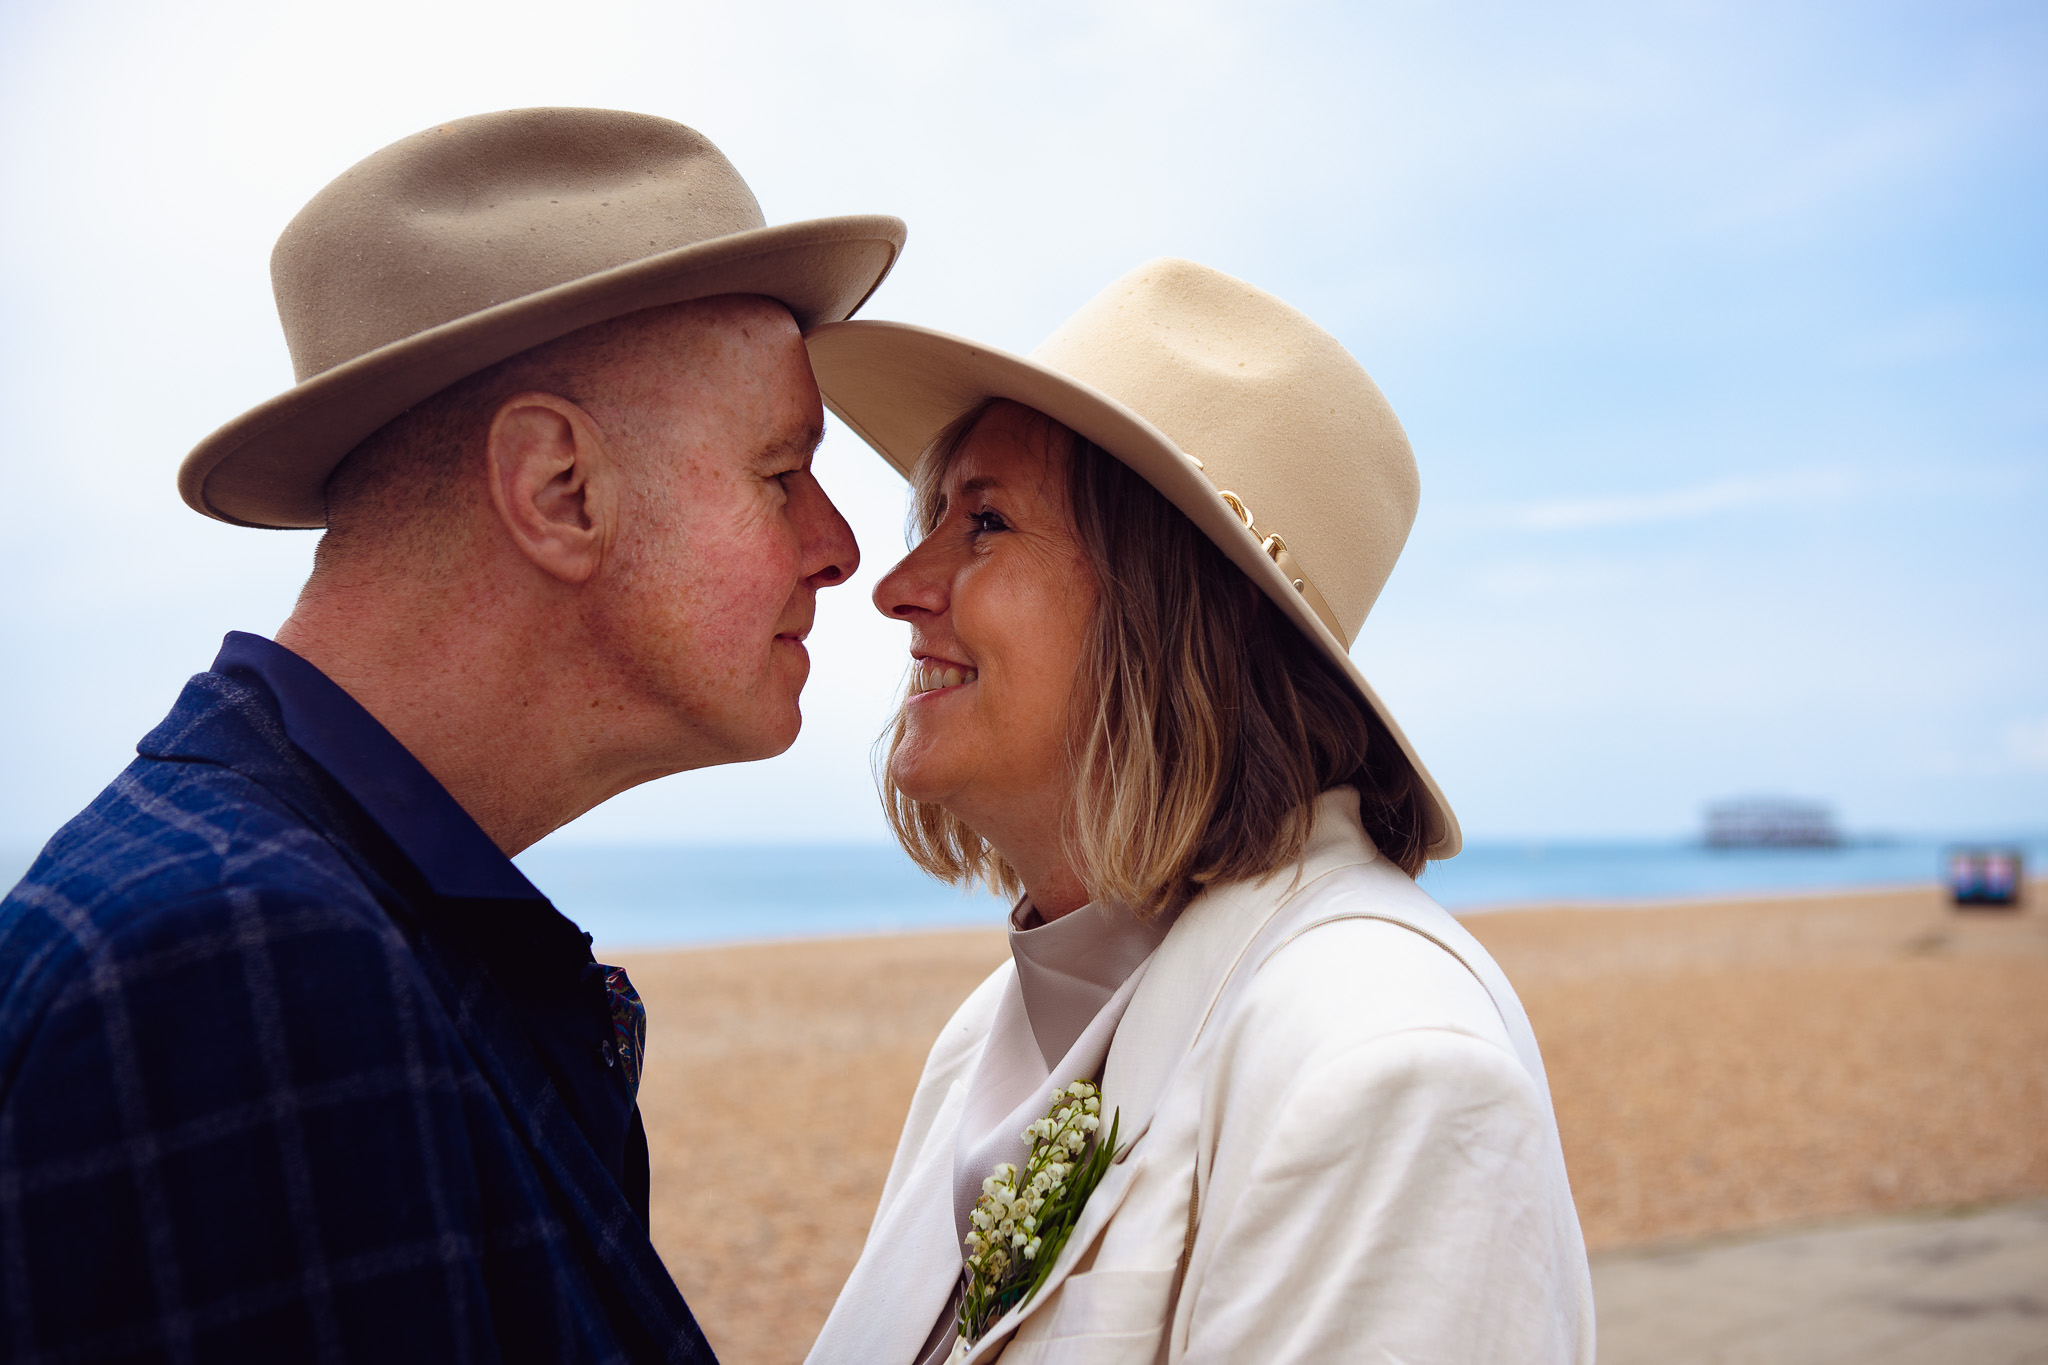 Mike and Mary touch fedoras as they look at each other during their couple portrait session near Brighton West Pier.